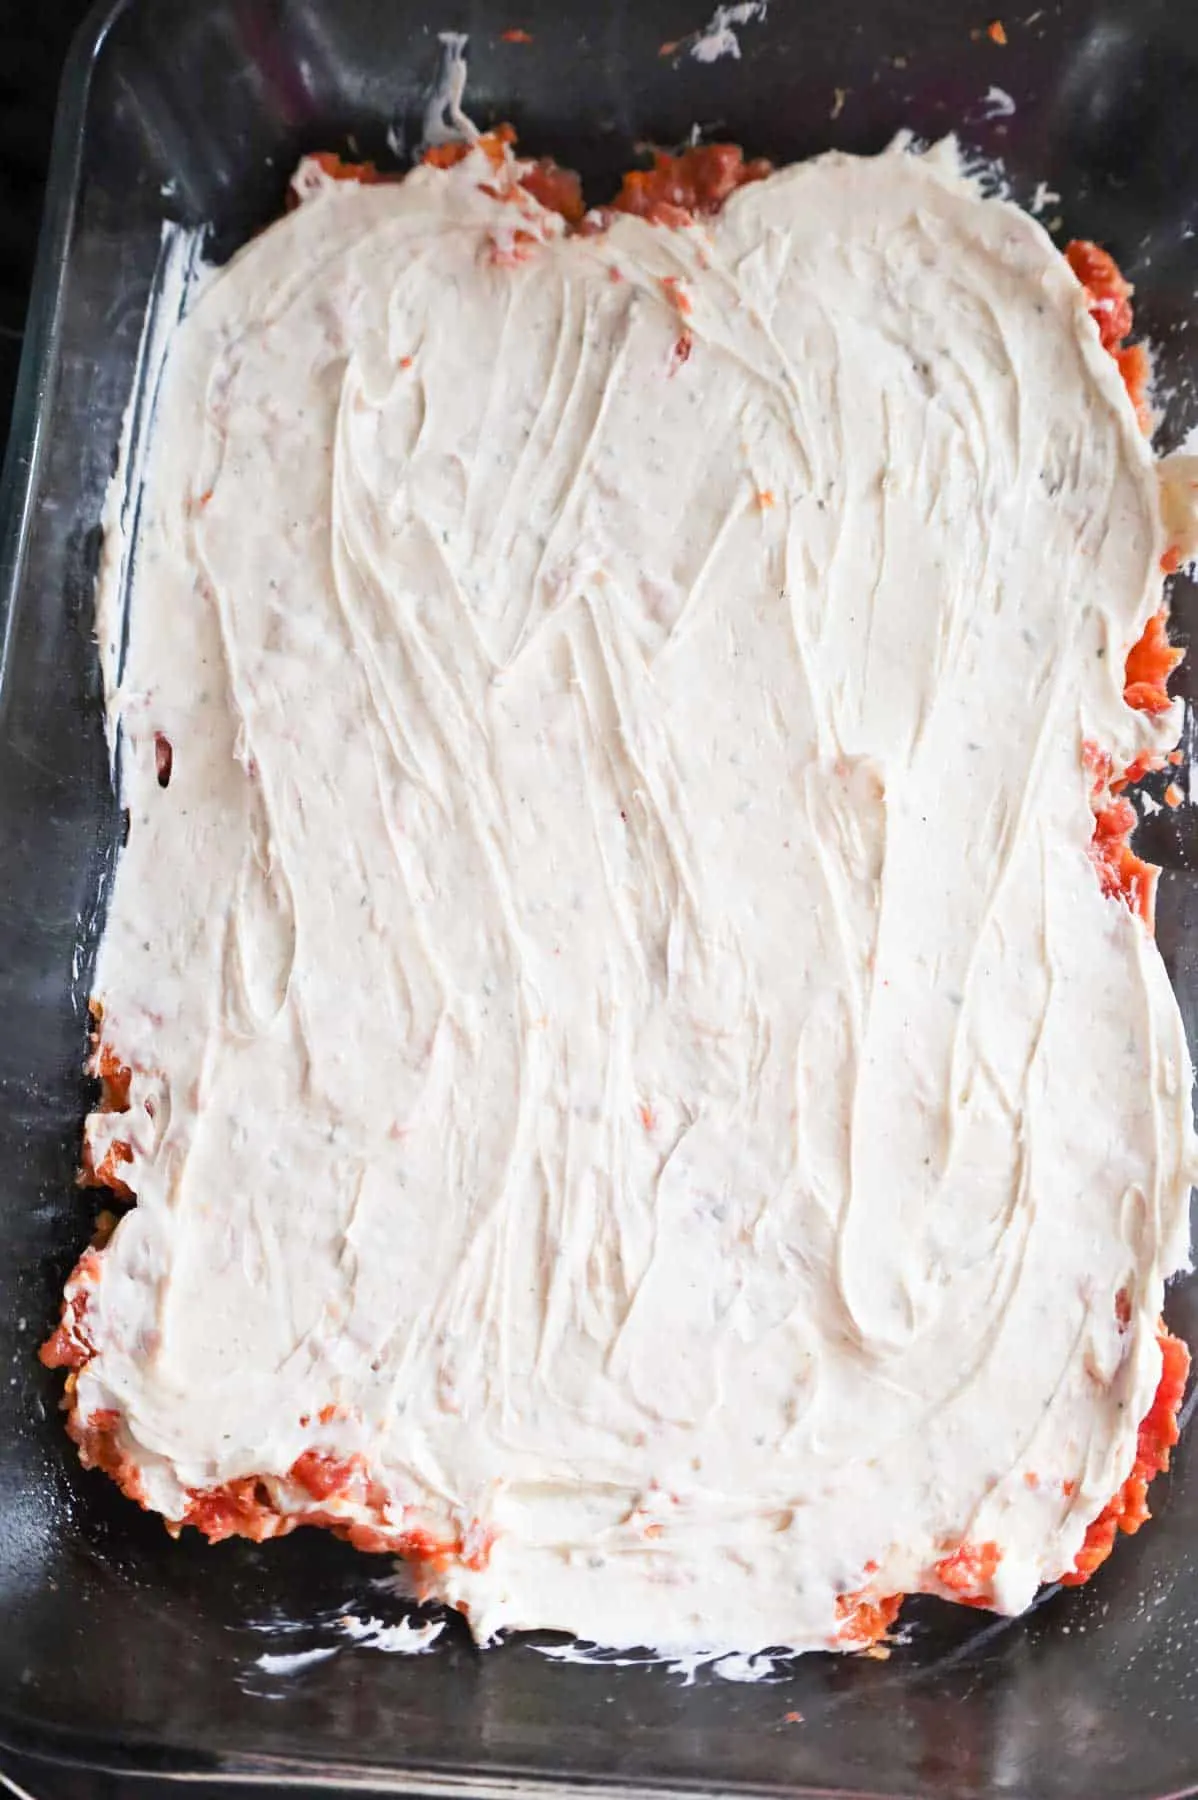 cream cheese mixture spread on top of meat mixture in a baking dish